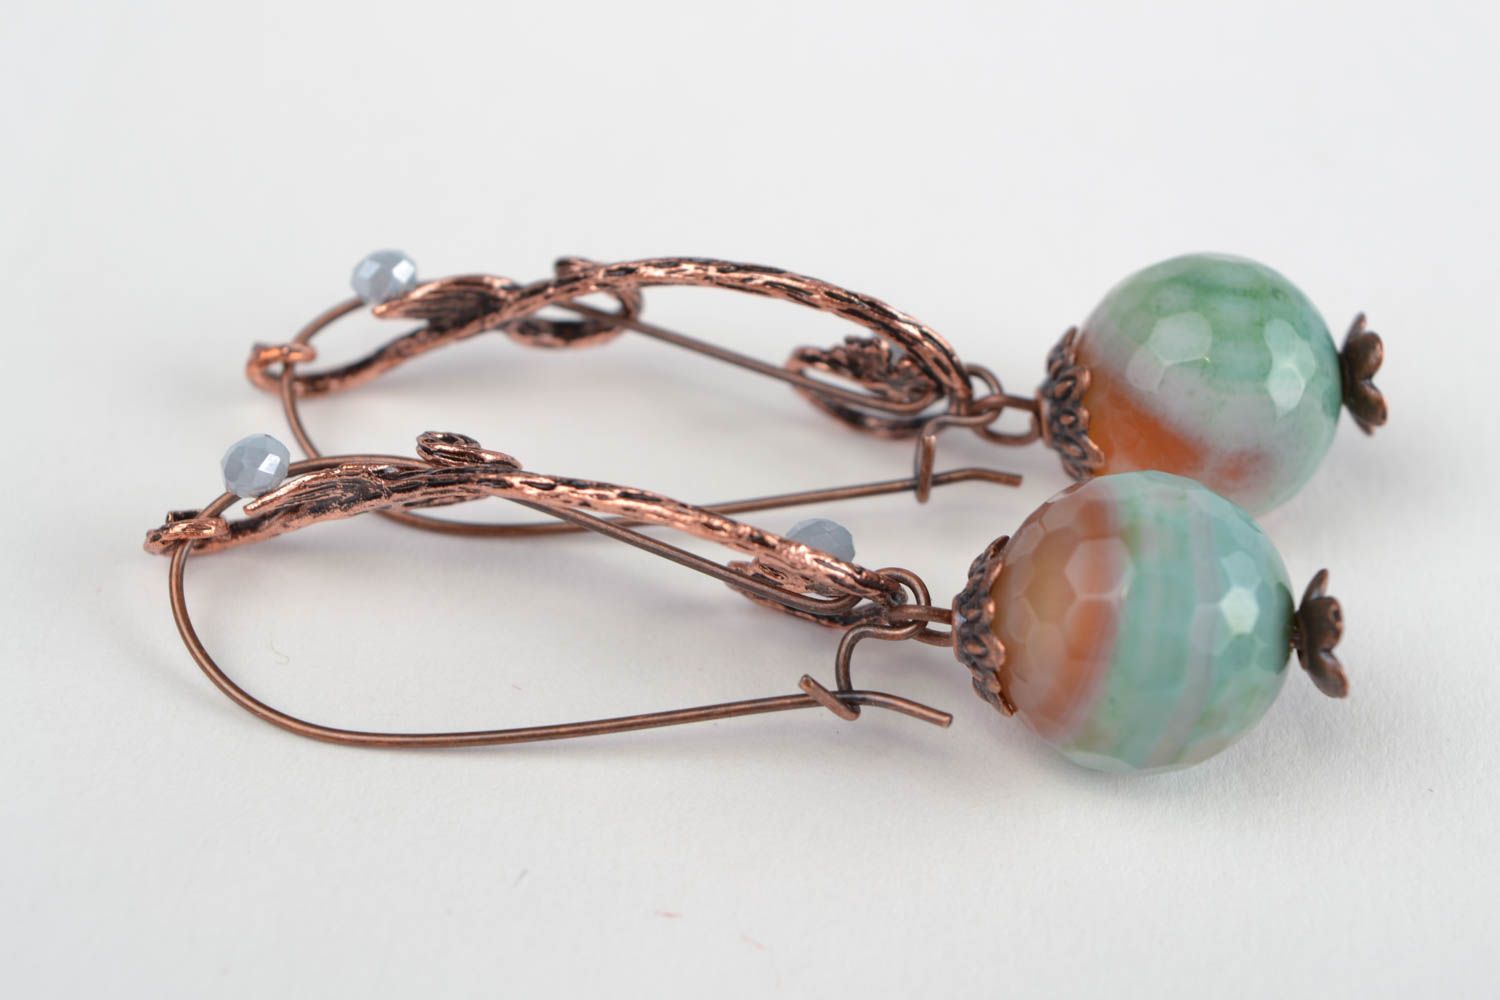 Handmade long dangling earrings with agate beads and fancy metal fittings photo 5